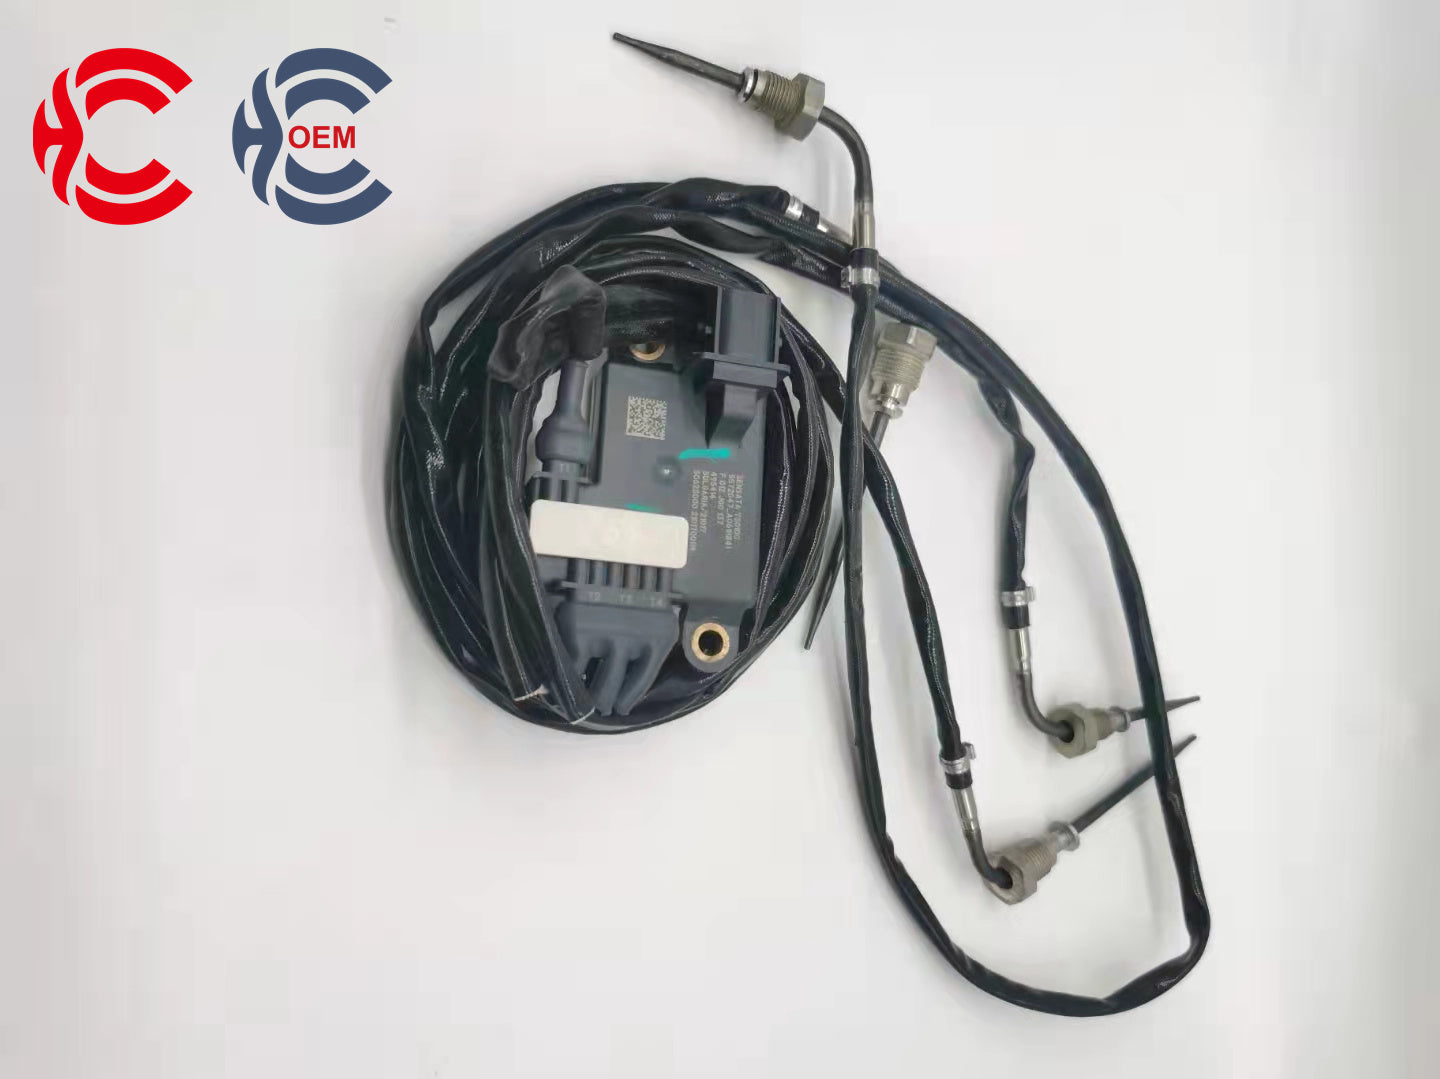 OEM: TS0100 495414 5572047-A061H841Material: MetalColor: SilverOrigin: Made in ChinaWeight: 200gPacking List: 1* Exhaust Gas Temperature Sensor More ServiceWe can provide OEM Manufacturing serviceWe can Be your one-step solution for Auto PartsWe can provide technical scheme for you Feel Free to Contact Us, We will get back to you as soon as possible.